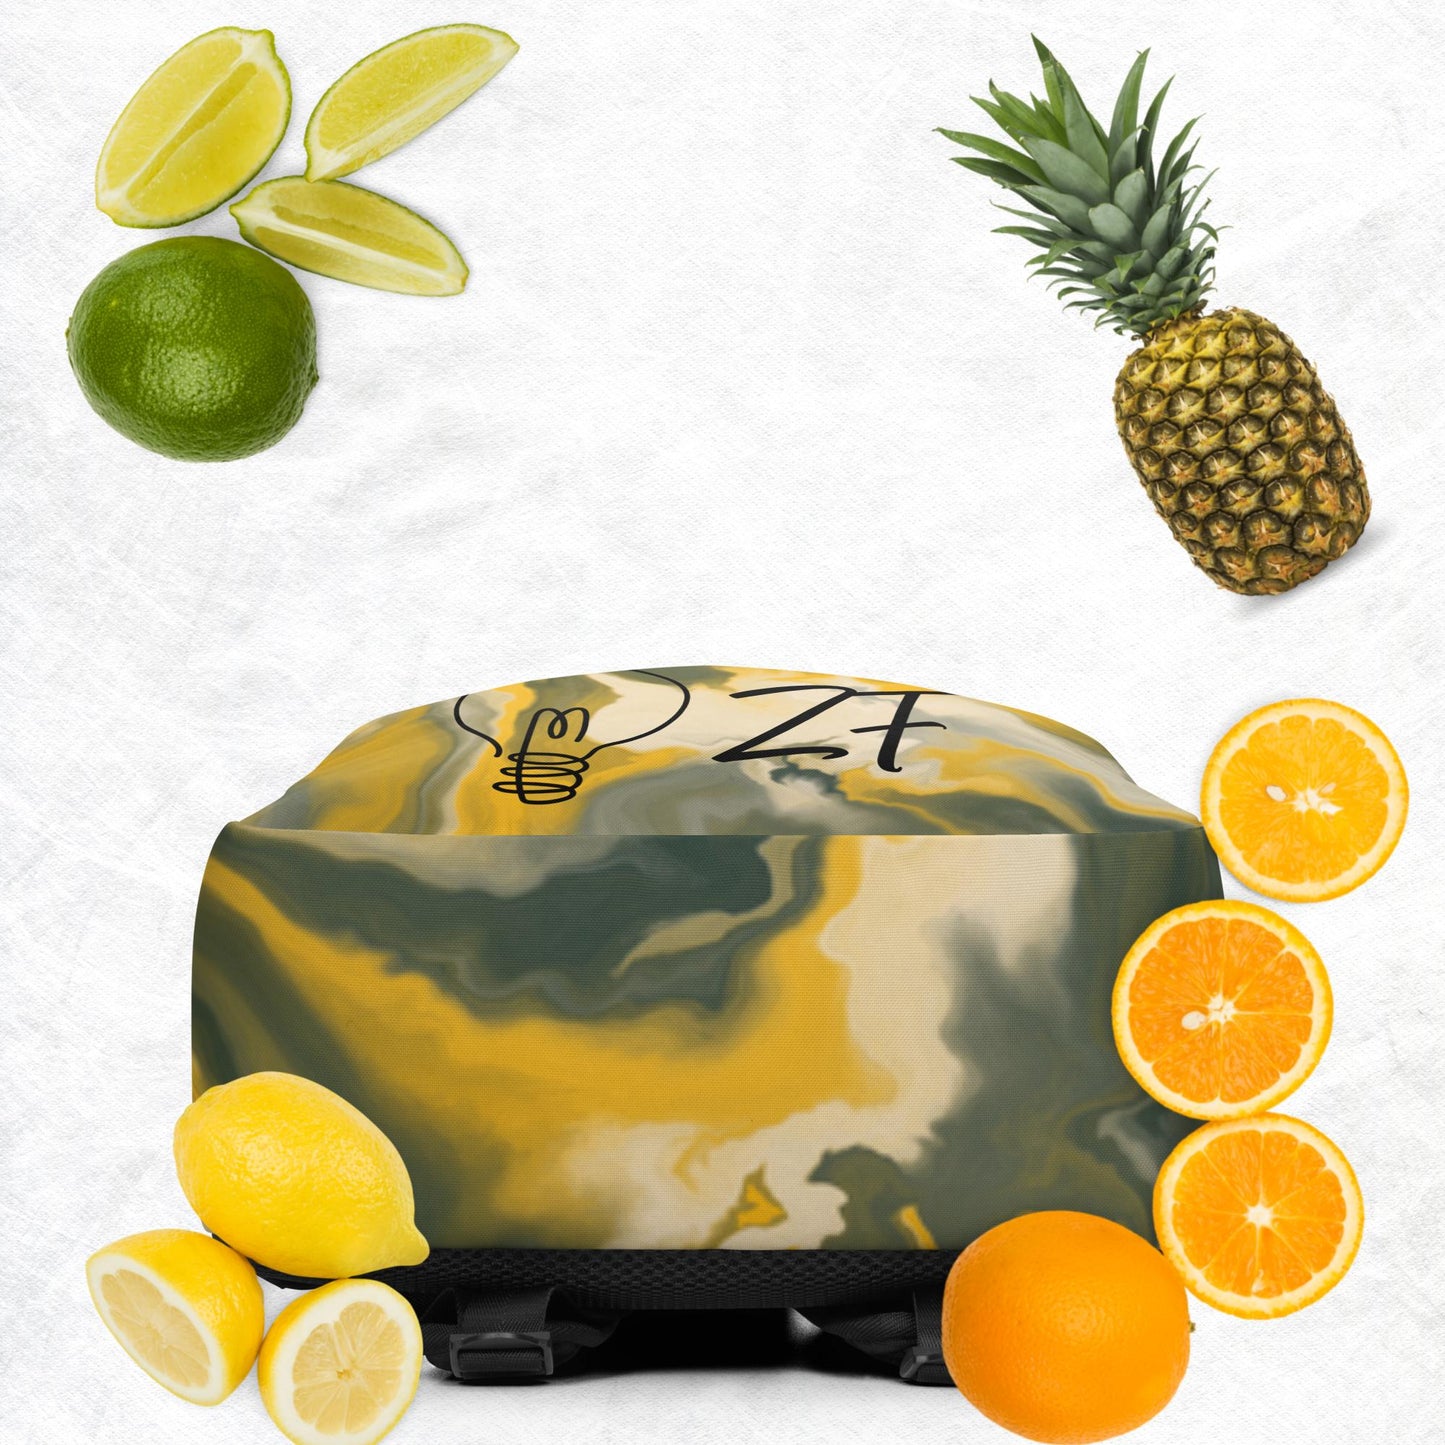 Minimalist Backpack - Be The Light - Yellow Abstract Water Color Camo Swirl Style Design